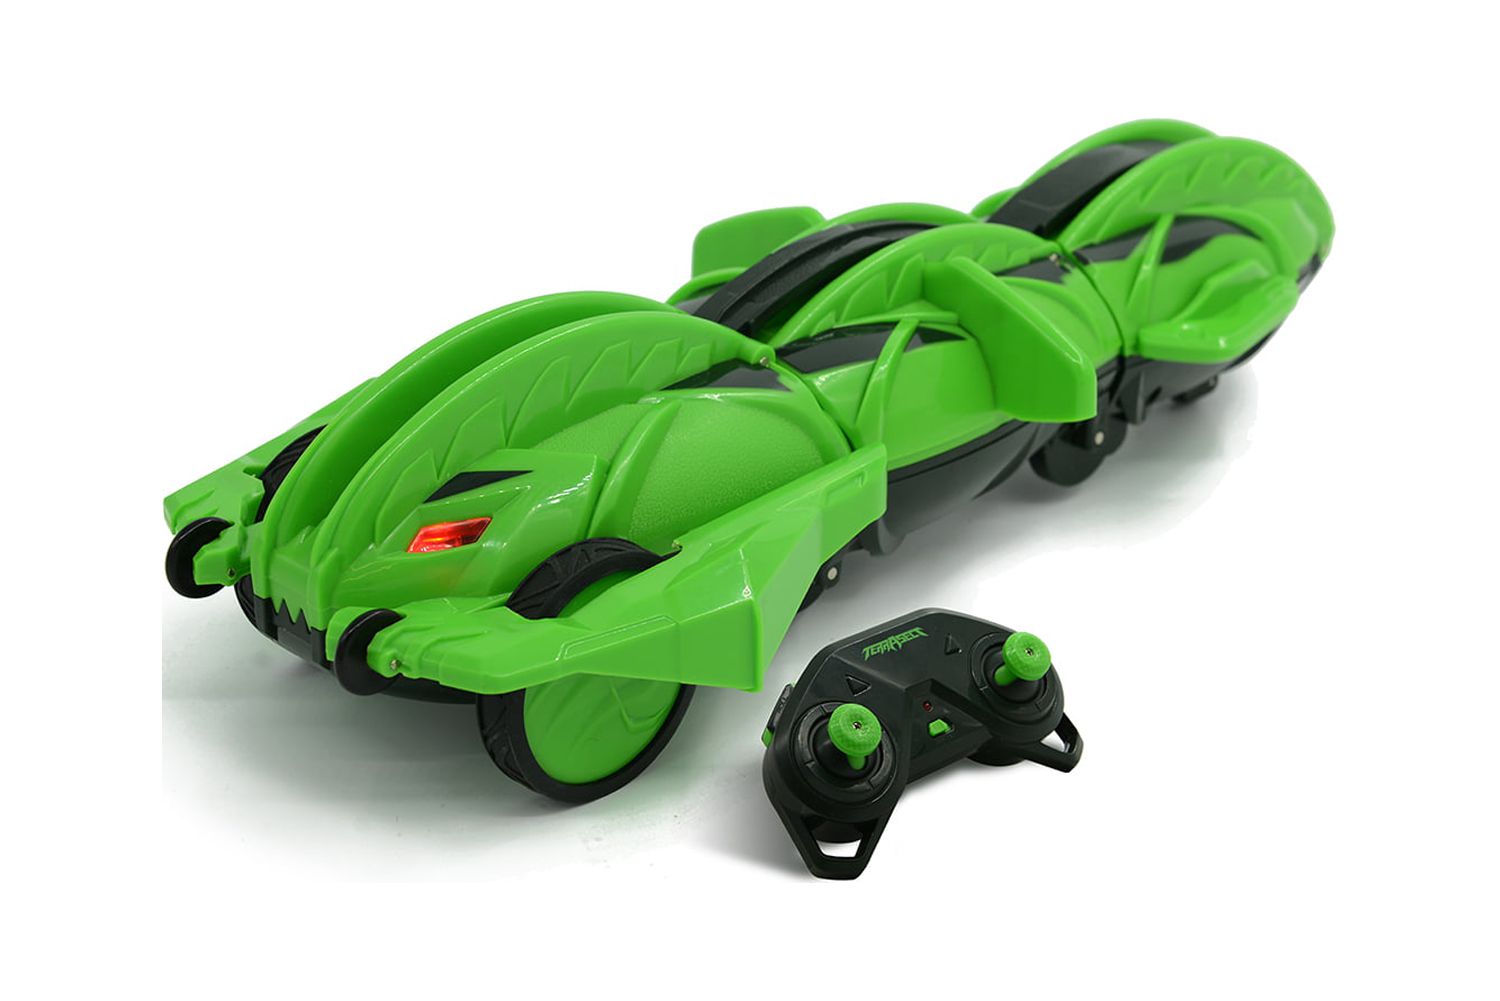 Terrasect Remote Control Transforming Vehicle, Green, 2.4 Ghz - image 5 of 9